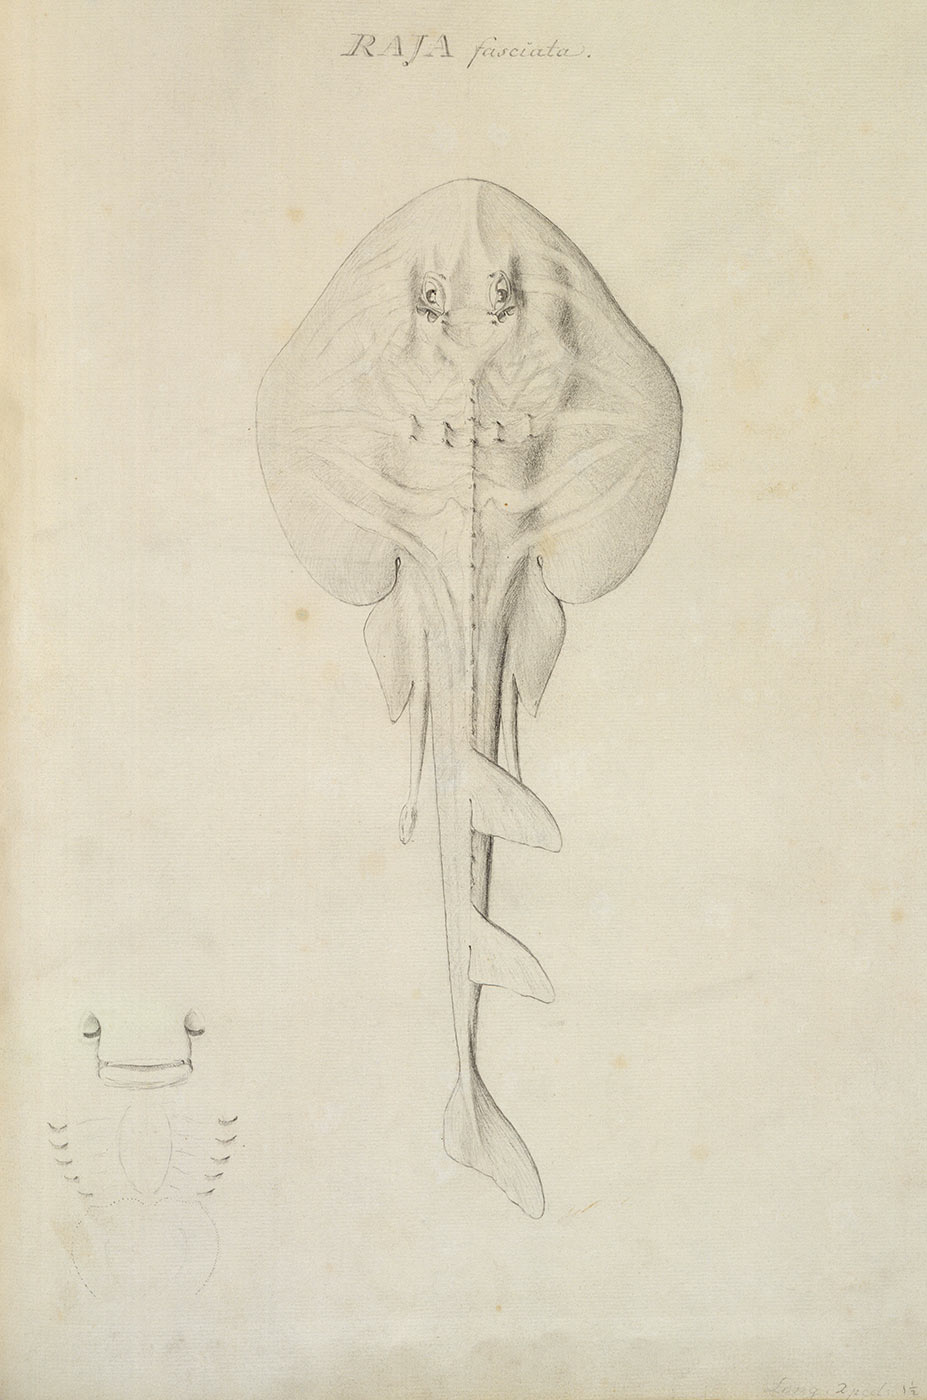 Pencil sketch of a stingray, with a sketch of the underside of its head bottom left.